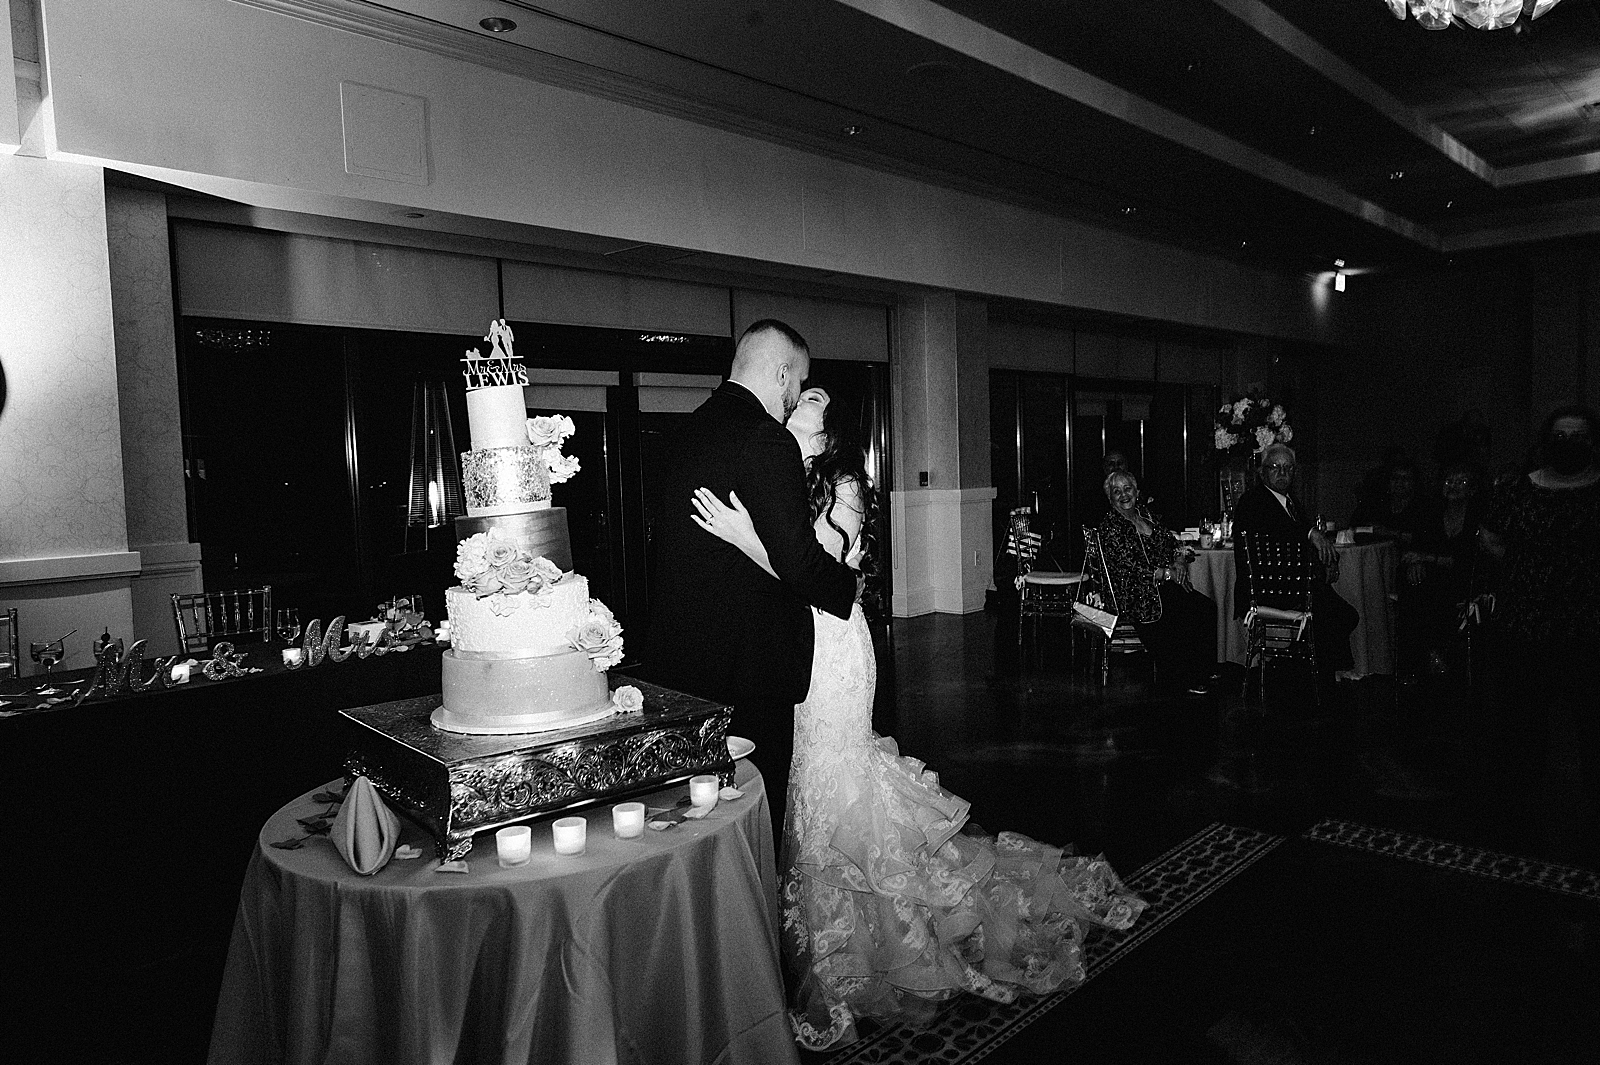 B&W Bride and Groom slow dancing together